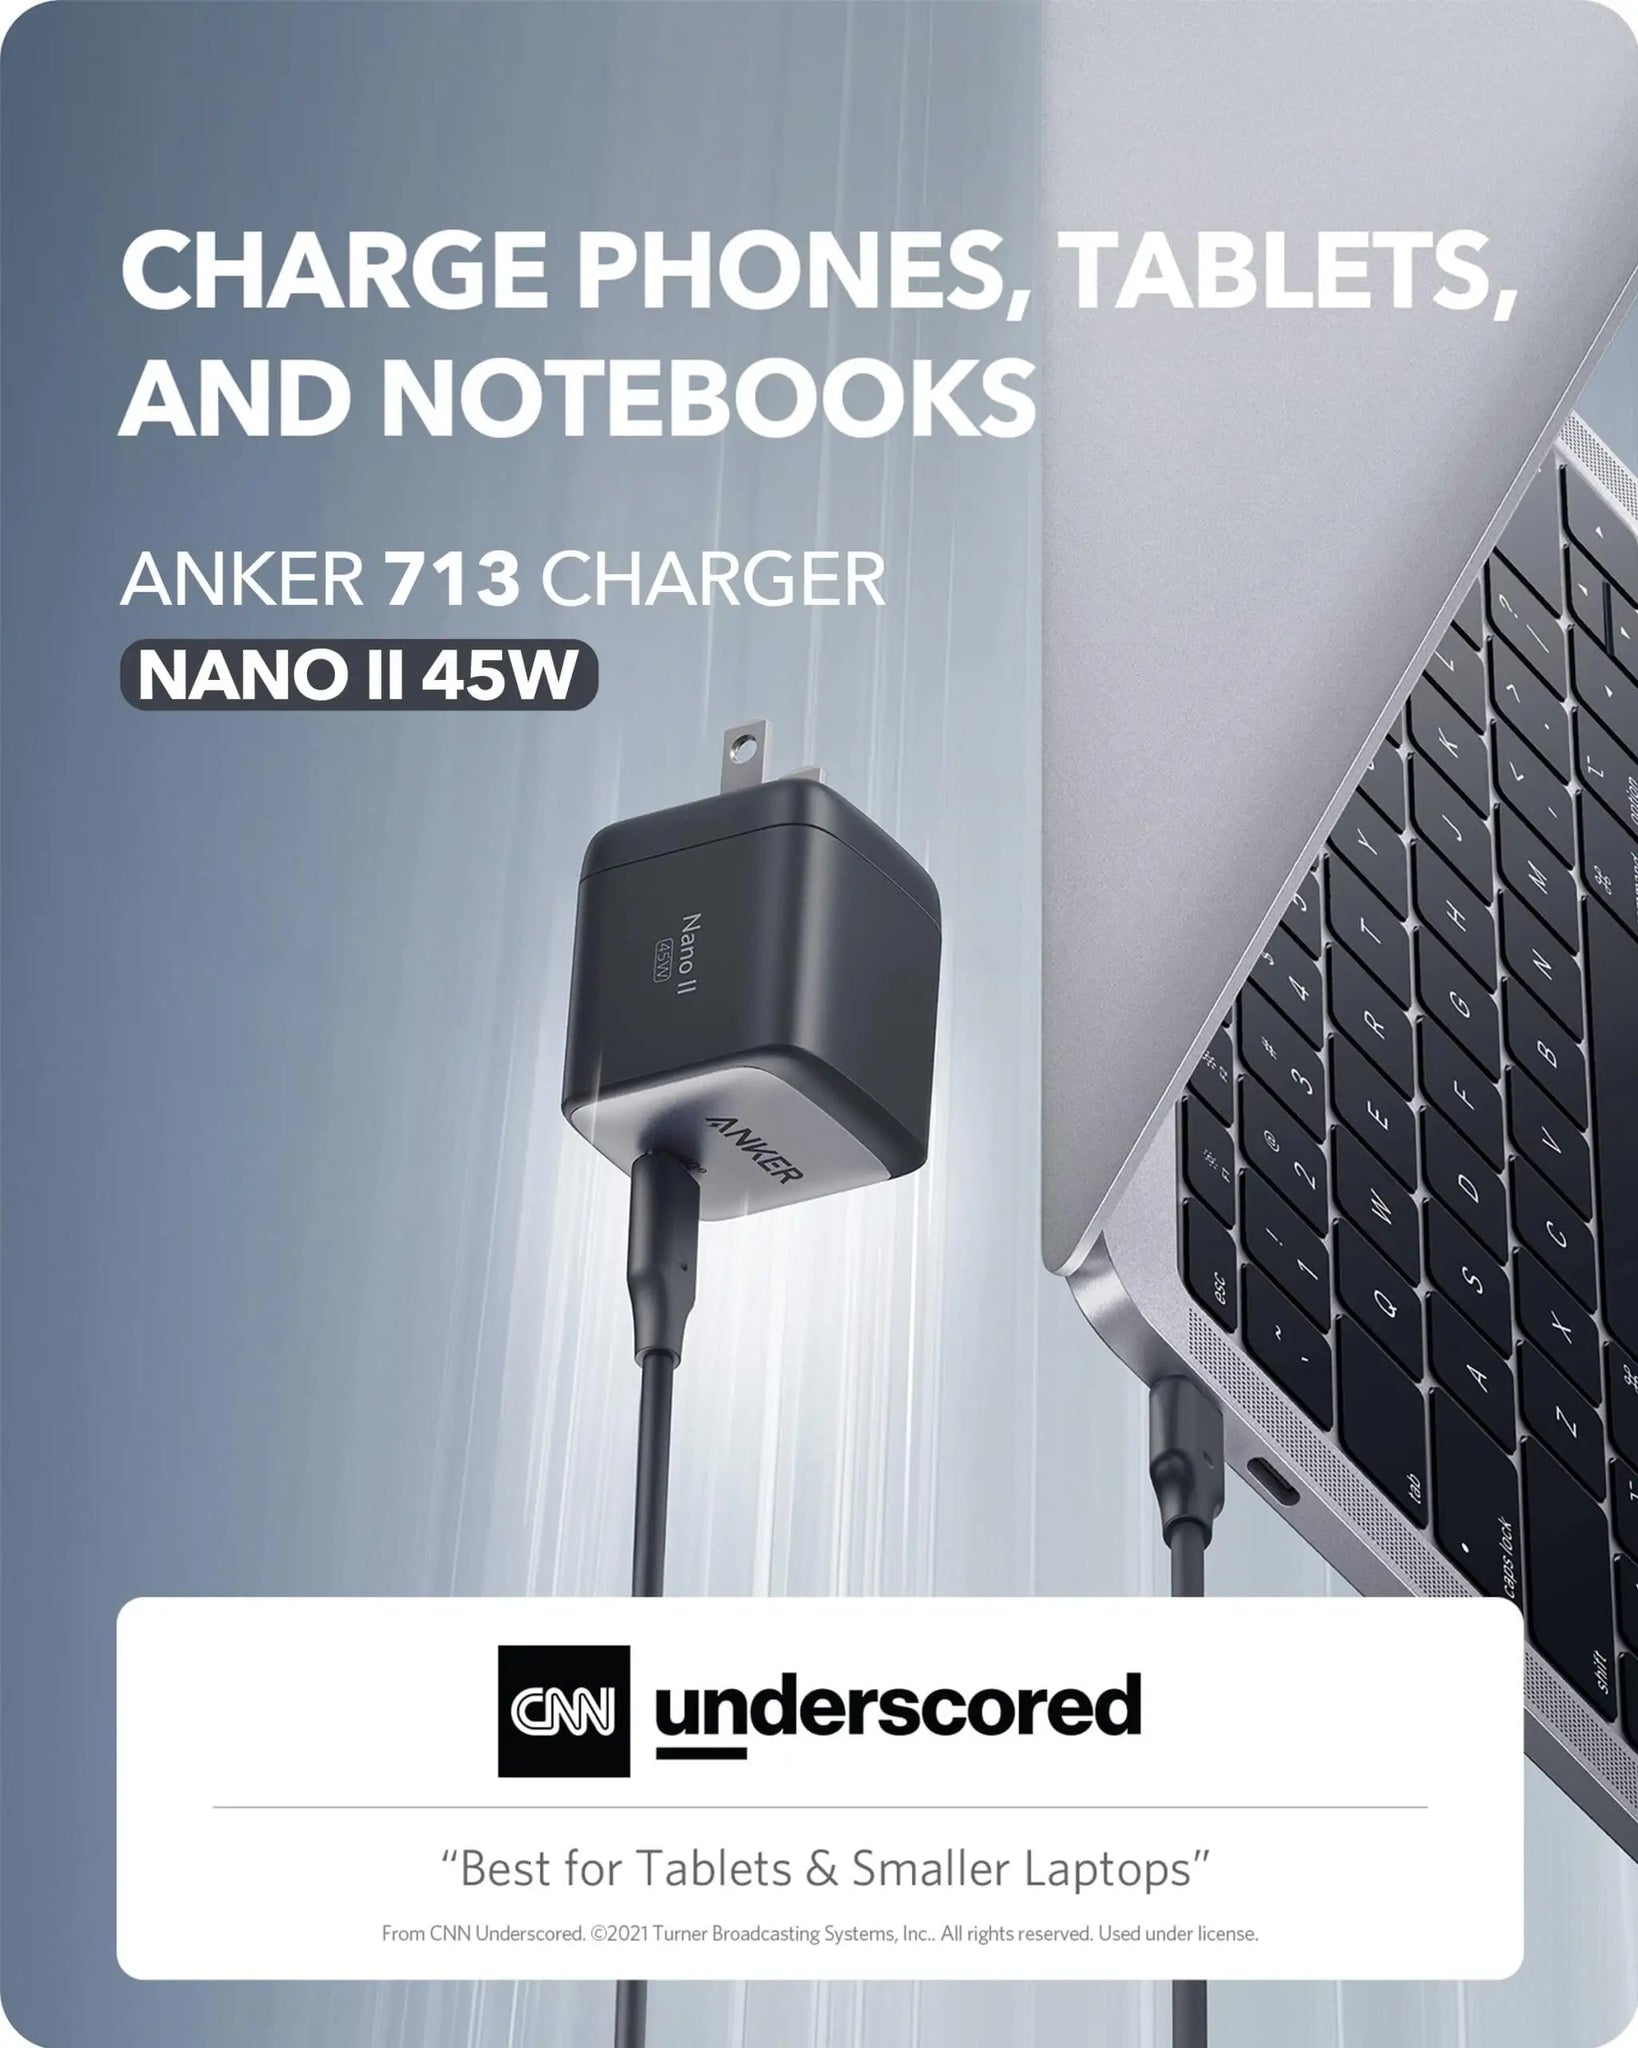 Anker USB C Charger 713 Charger (Nano II 45W) GaN II PPS Fast Compact Foldable Charger for Iphone Samsung